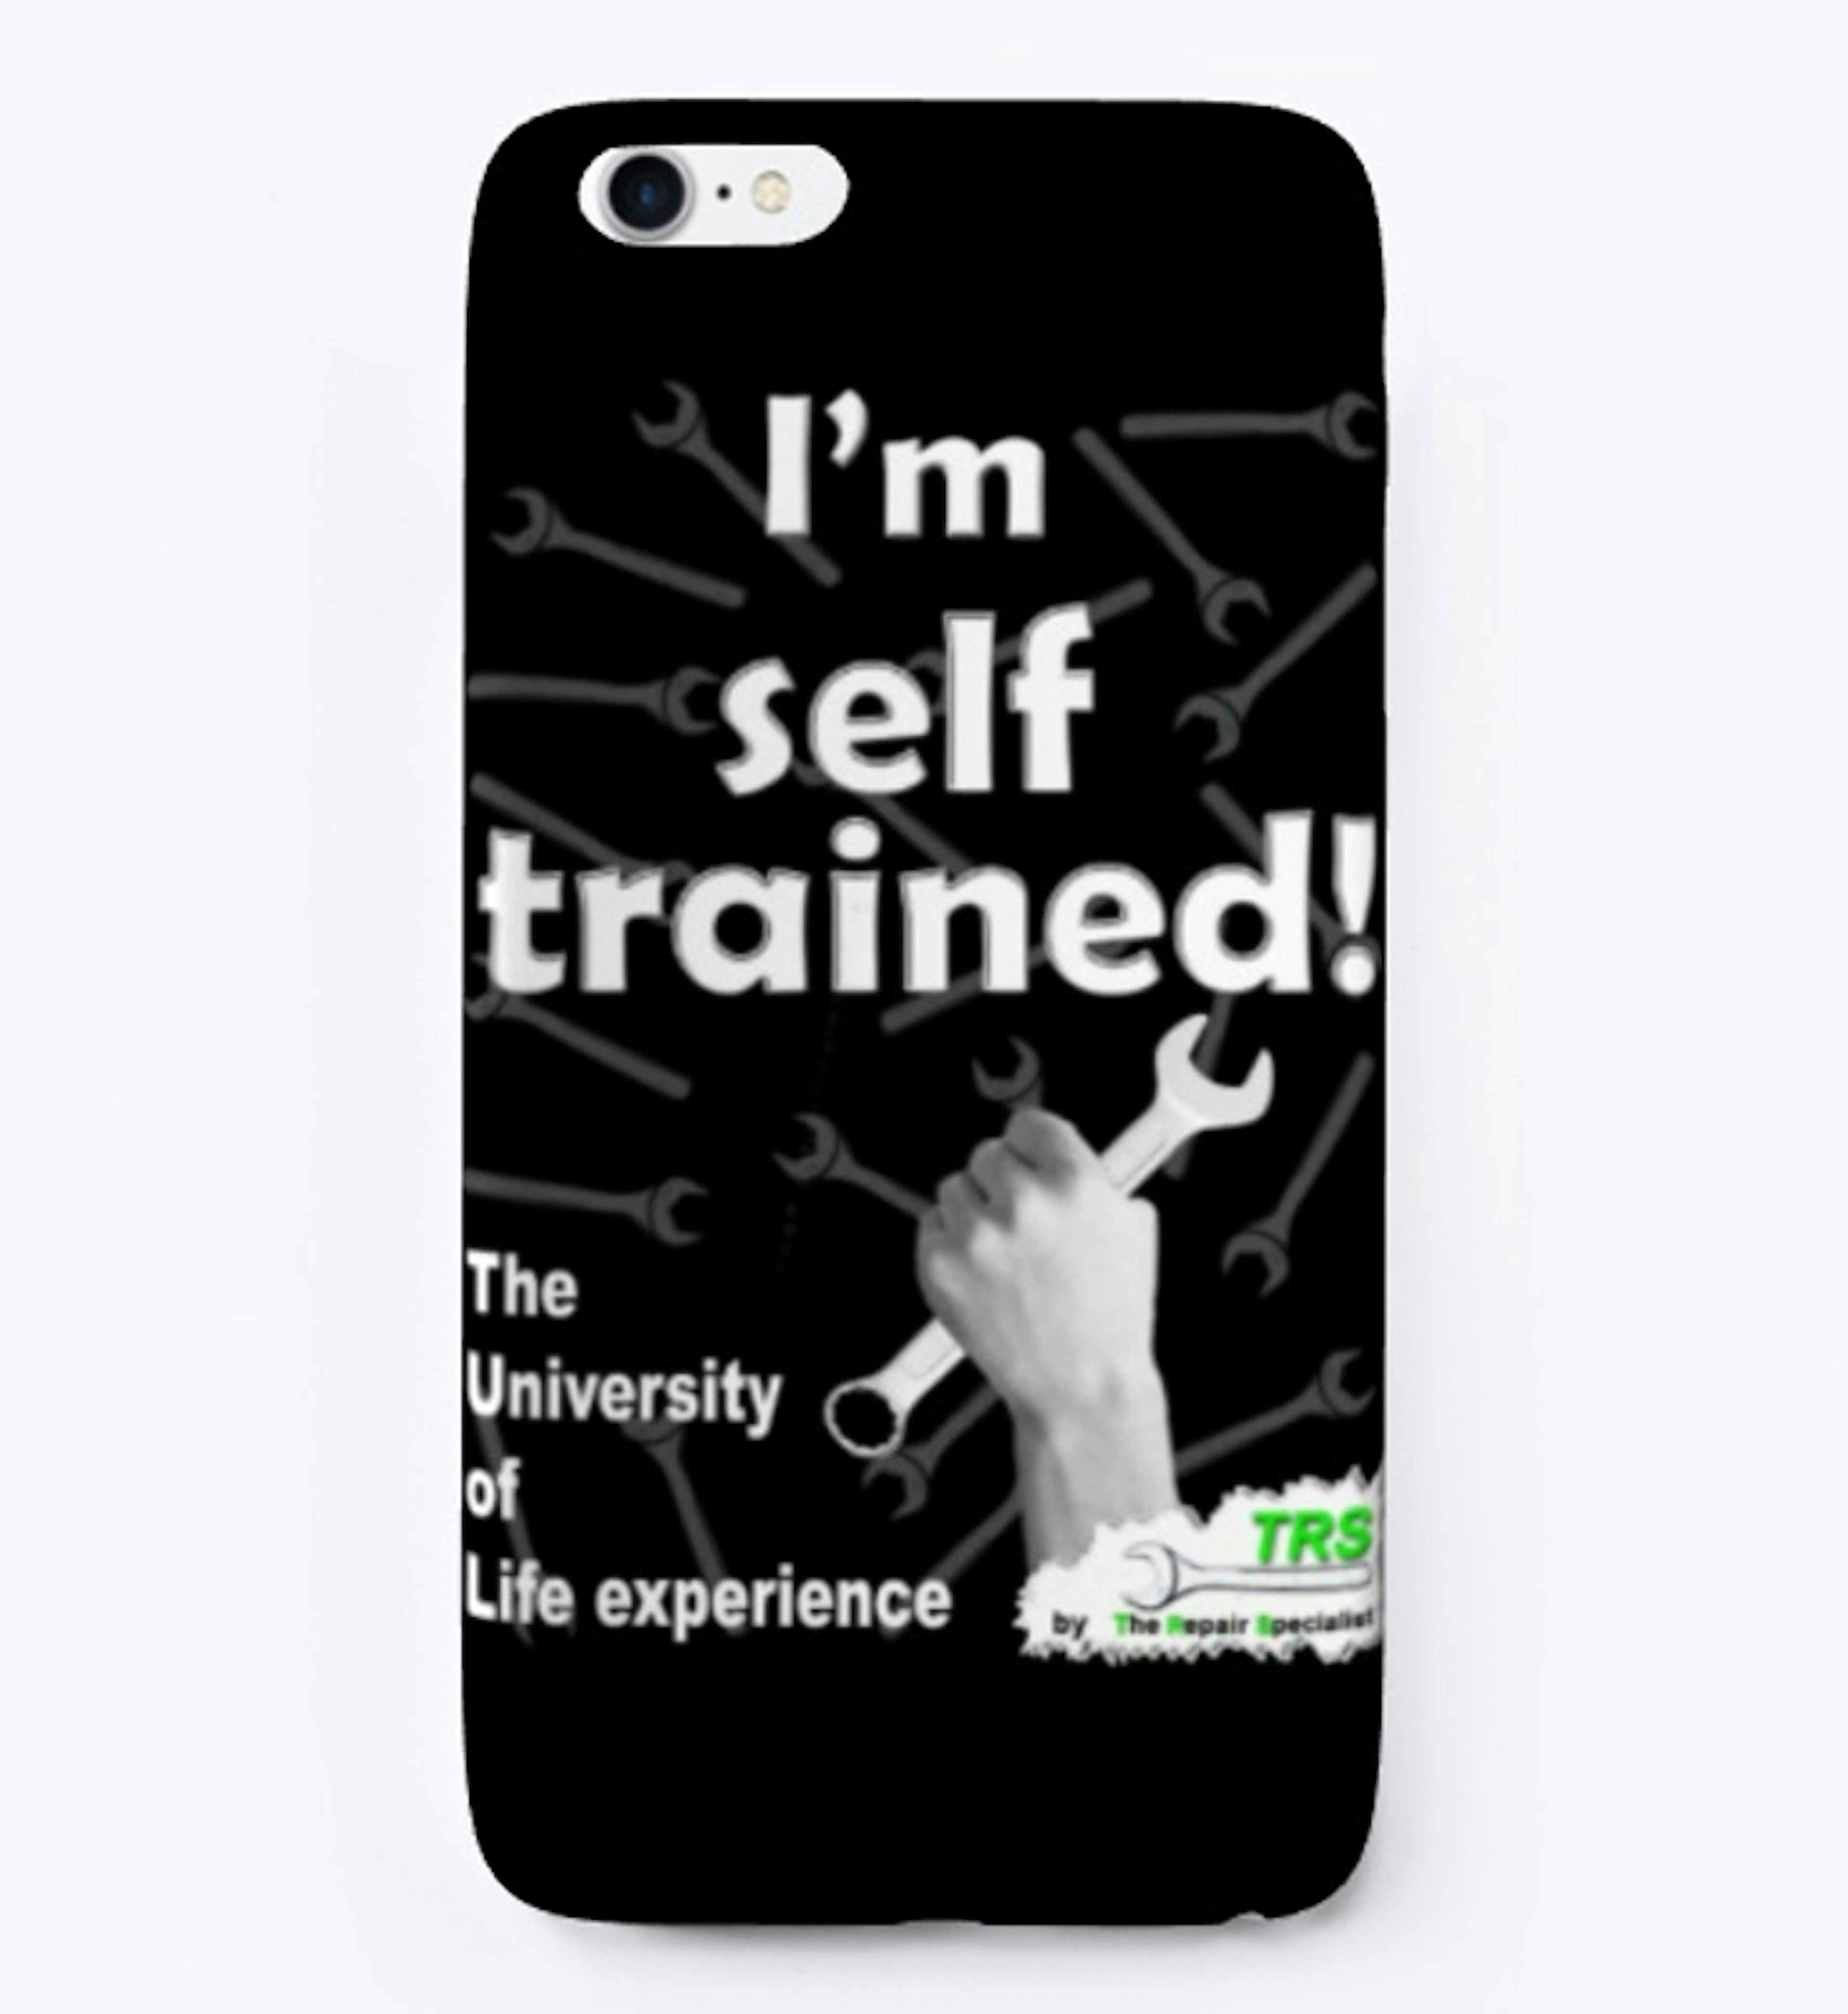 Self Trained. The University of Life